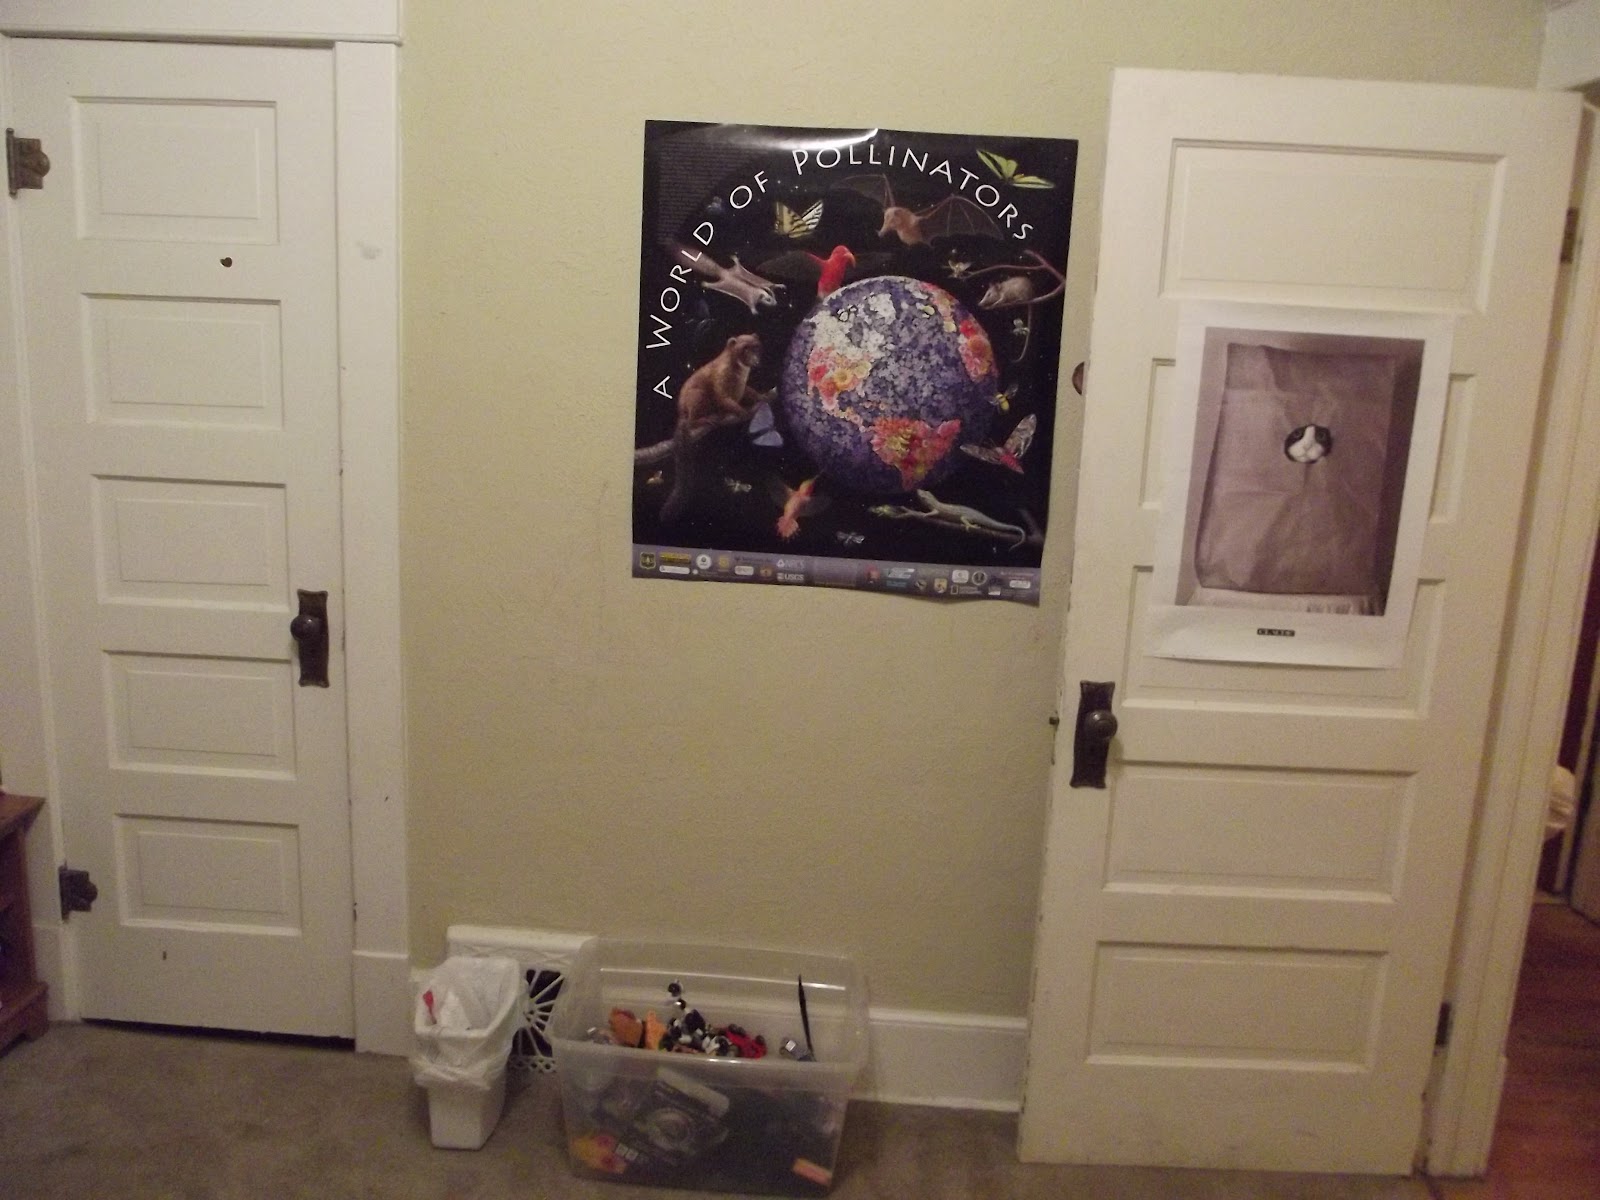 Doors with posters